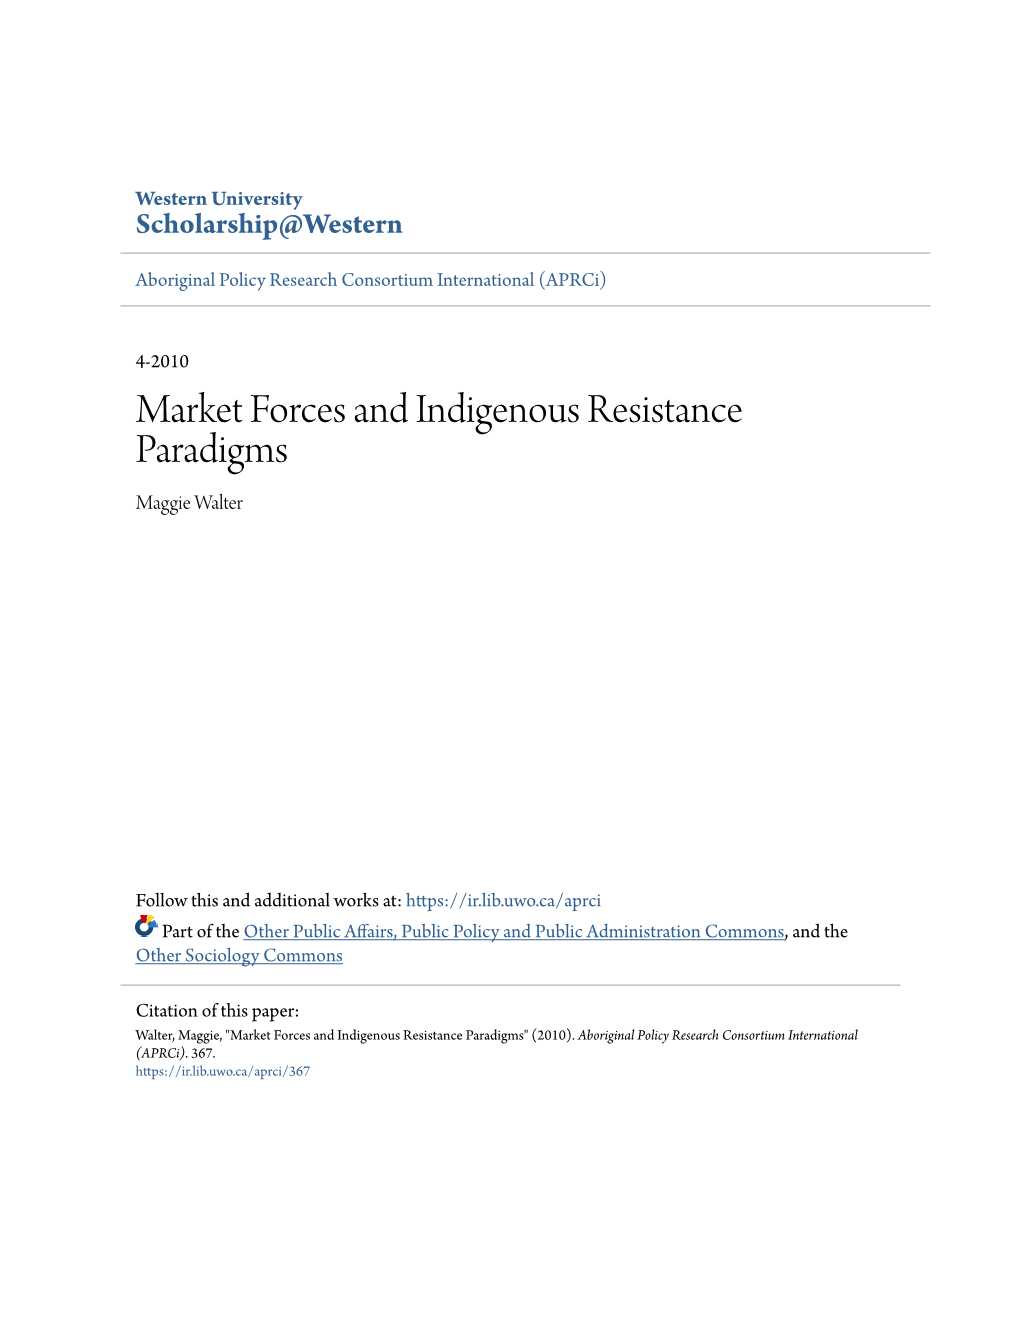 Market Forces and Indigenous Resistance Paradigms Maggie Walter